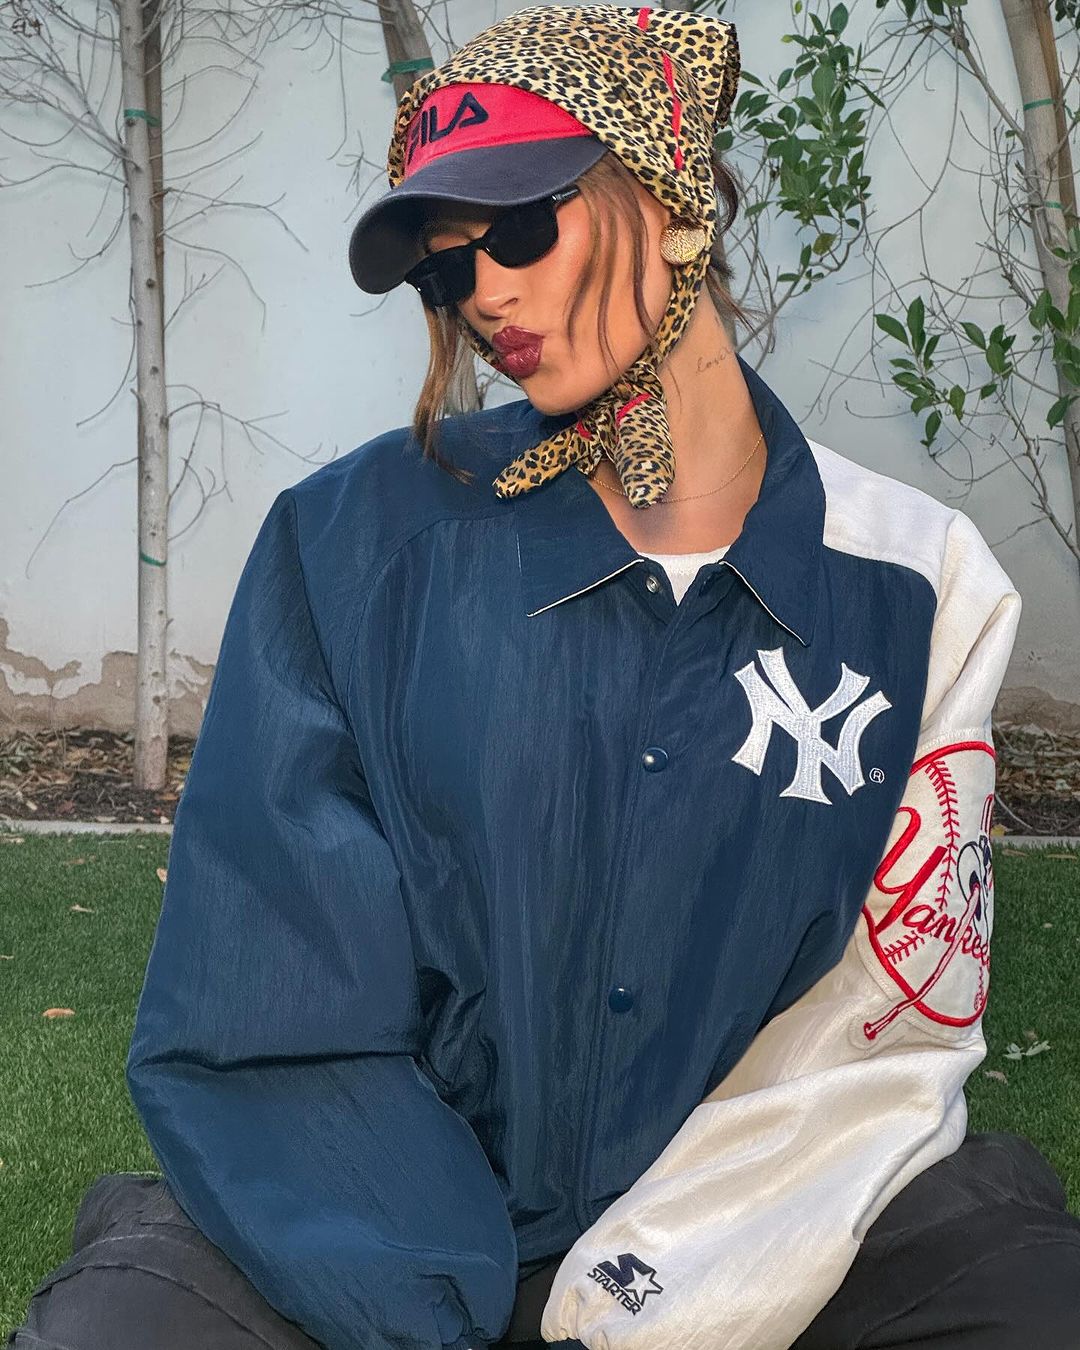 Hailey bundled up in a baggy jacket at Coachella